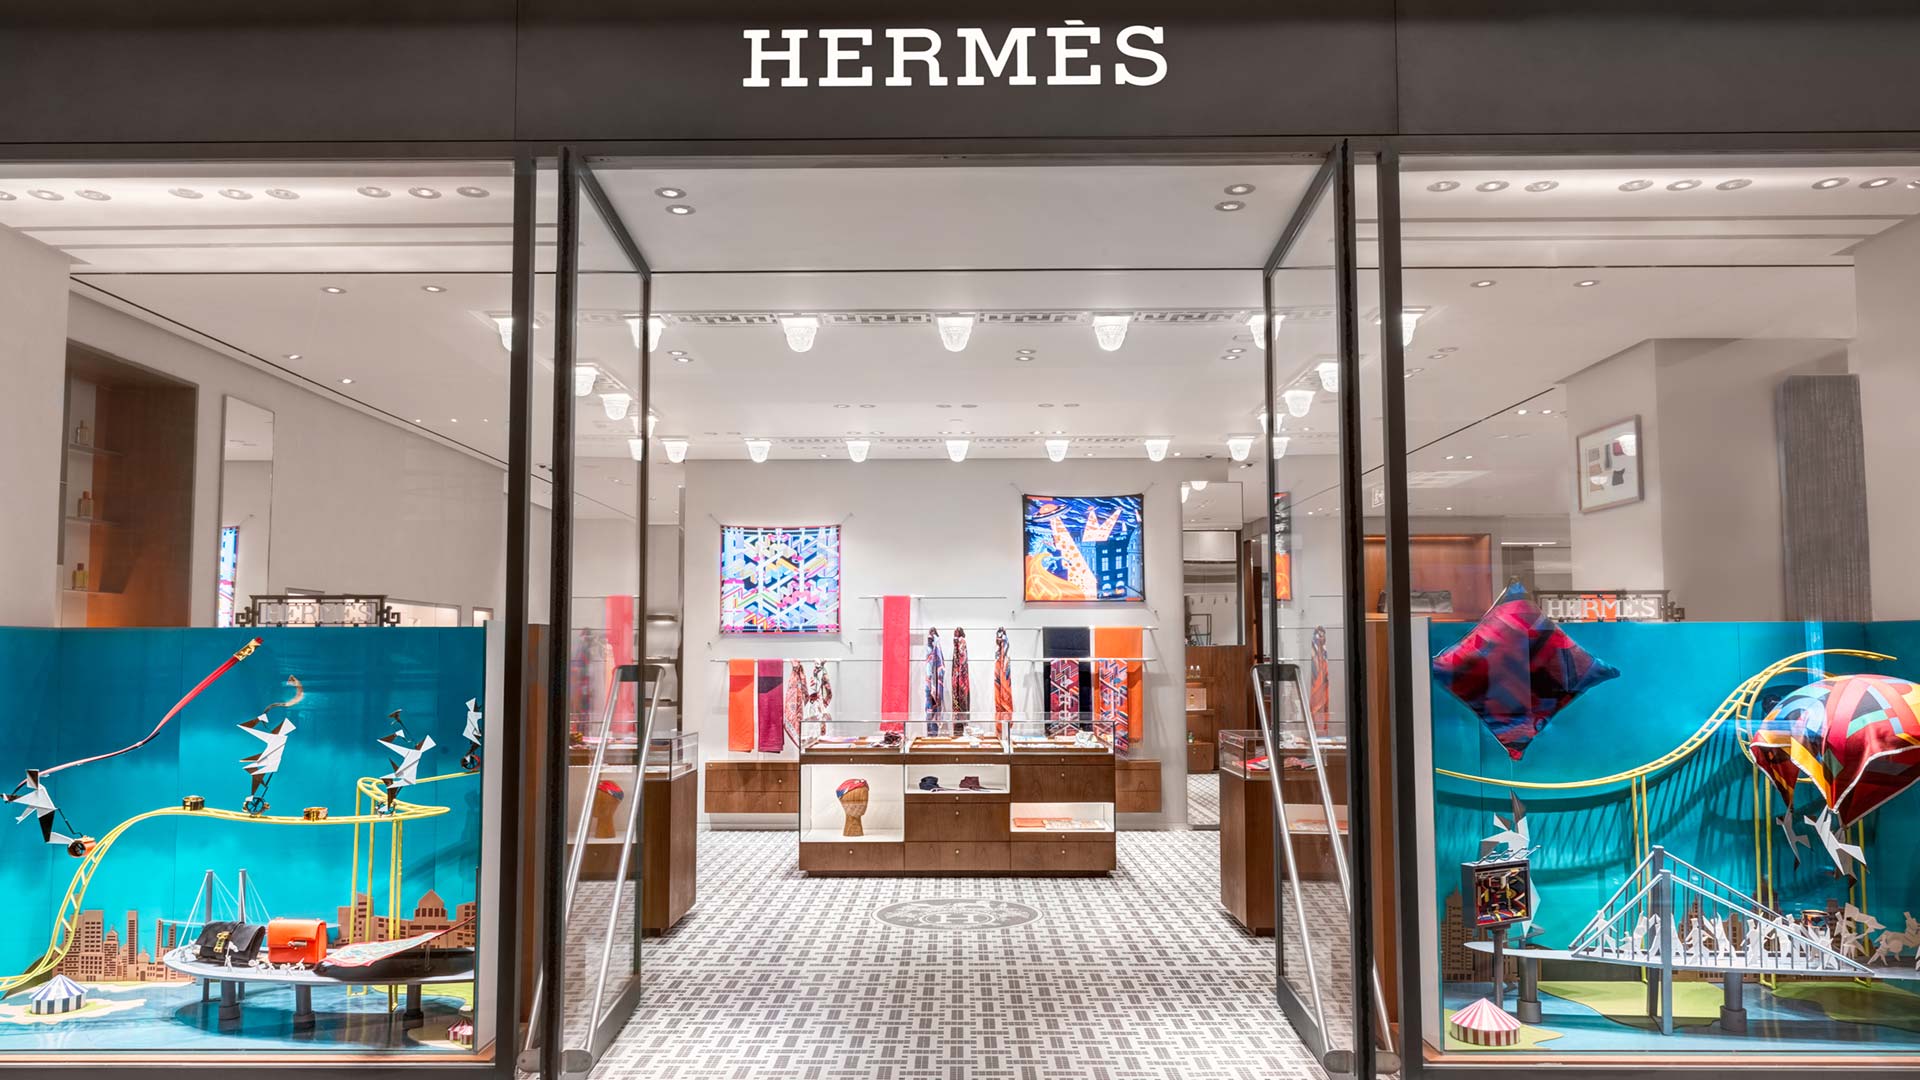 Hermes belongs to which country